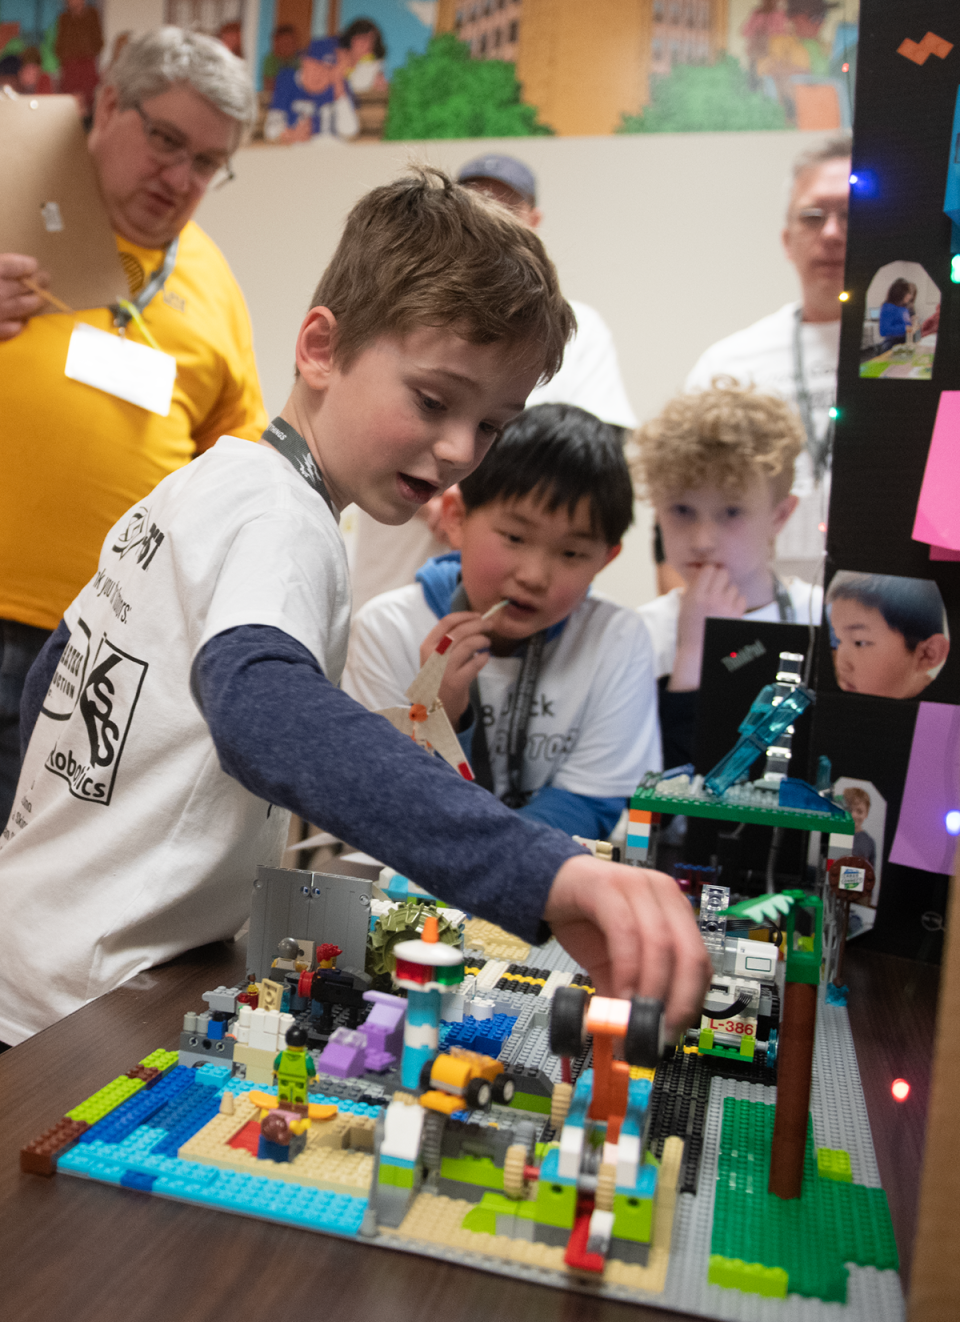 Members of the Lego Raptors team, Quin Turnidge, 7, of Kent, Jack Wang, 8, of Aurora, and Richard Martynowski, 6, of Hudson, during judging.